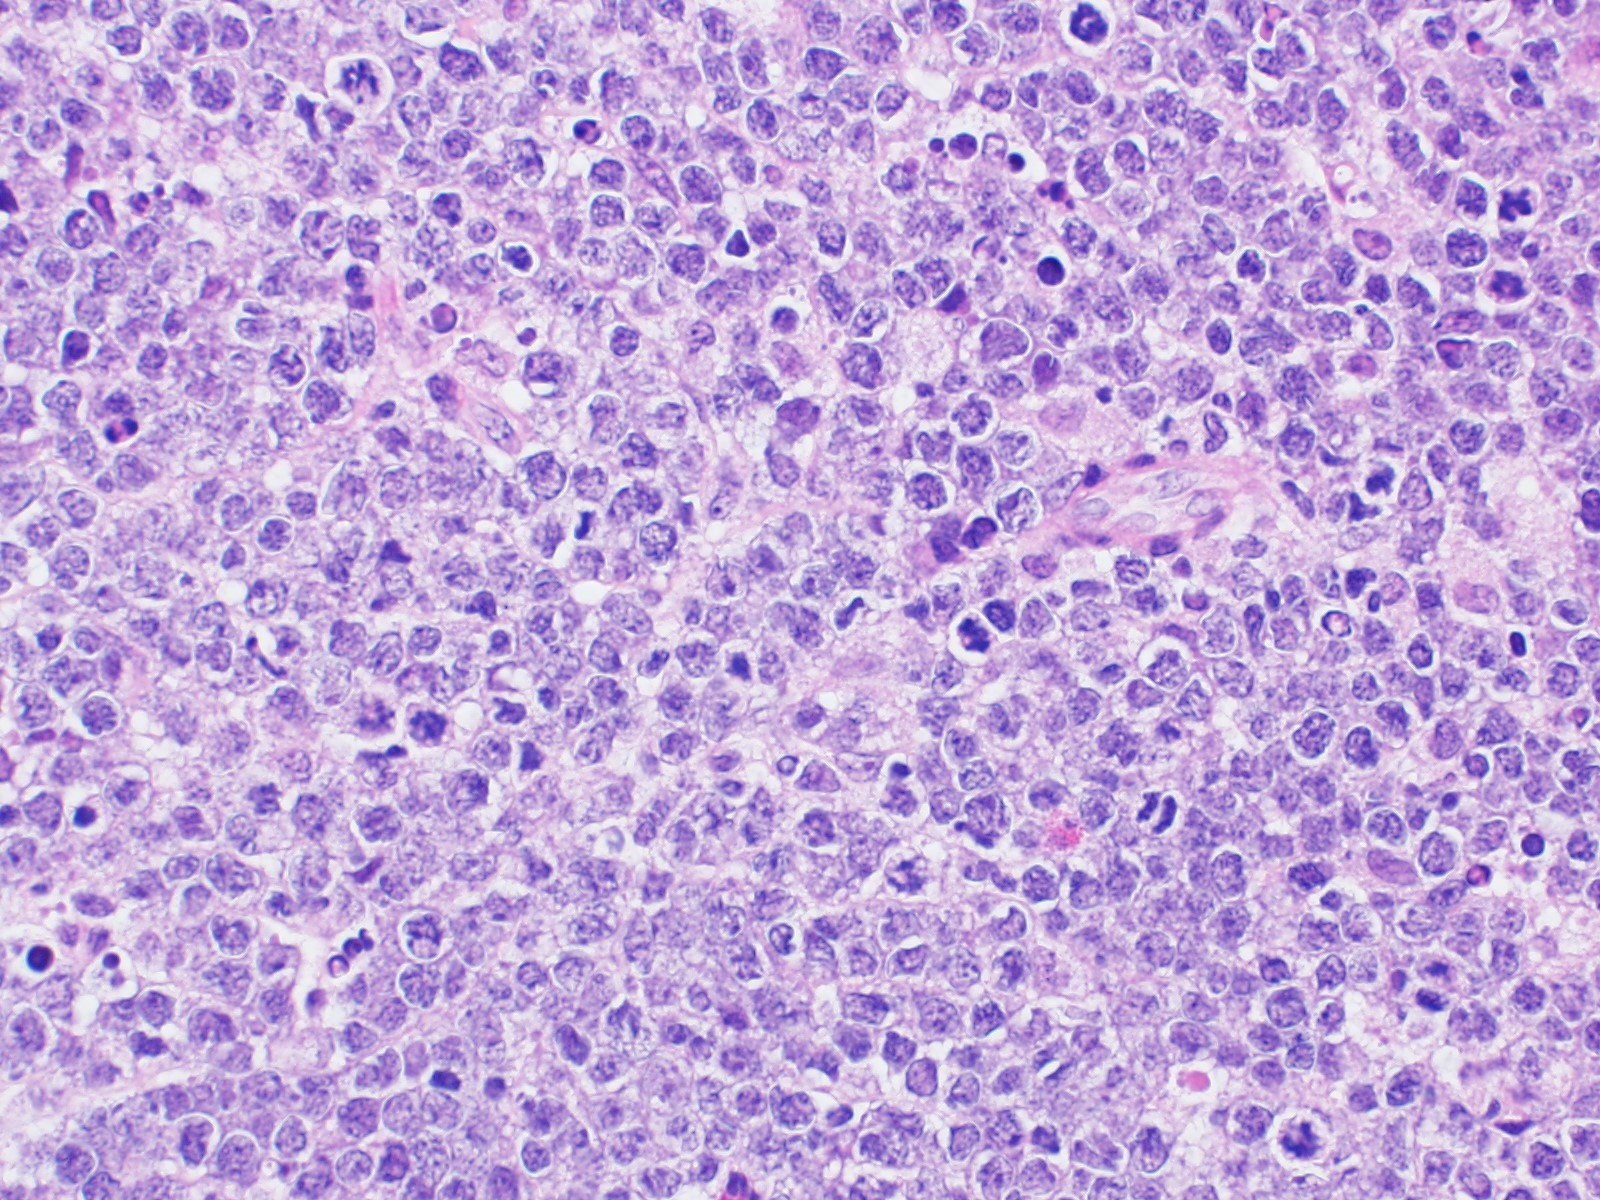 Atypical lymphoma cells